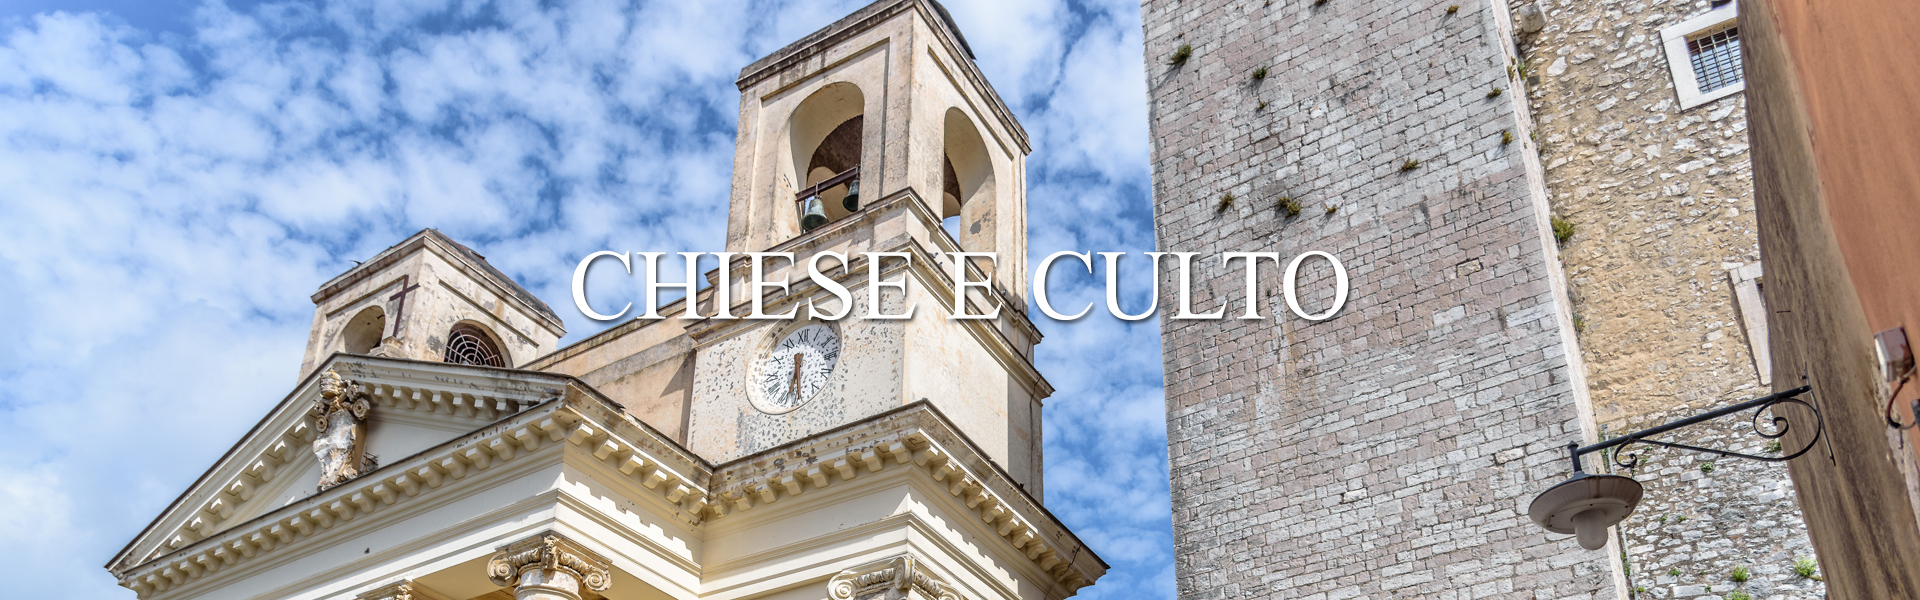 chiese-culto-1920x600